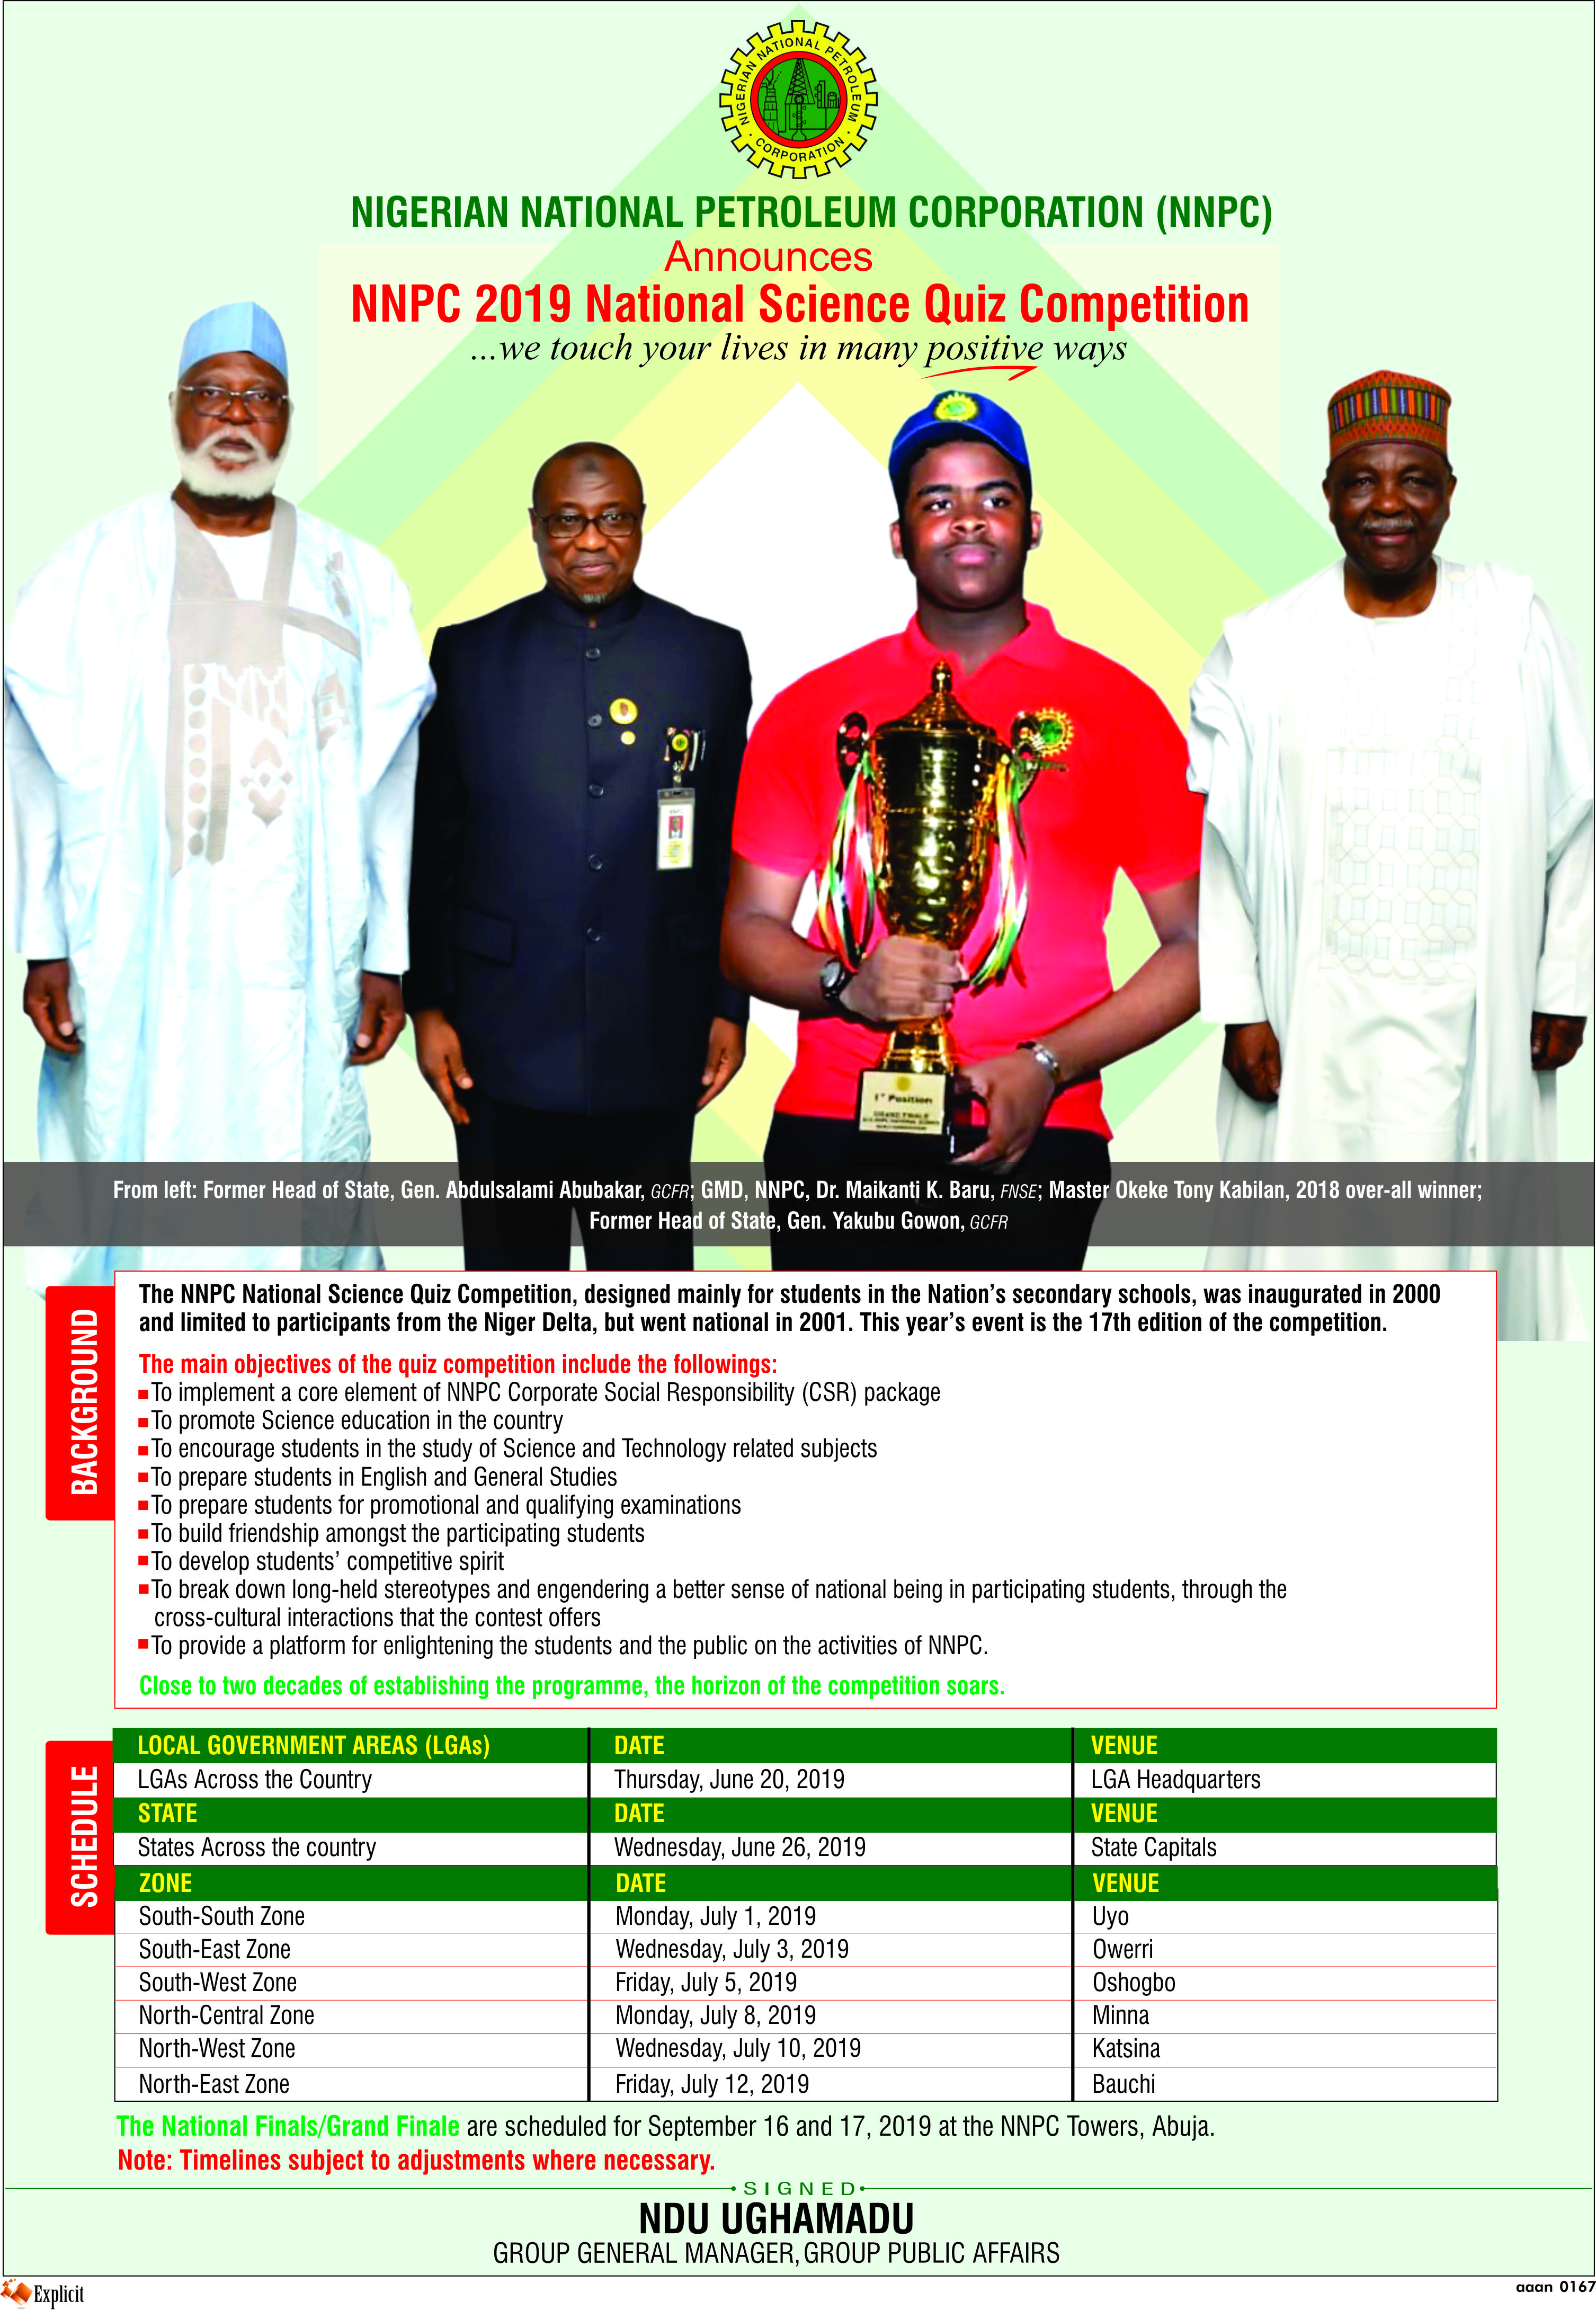 NNPC 2019 National Science Quiz Competition